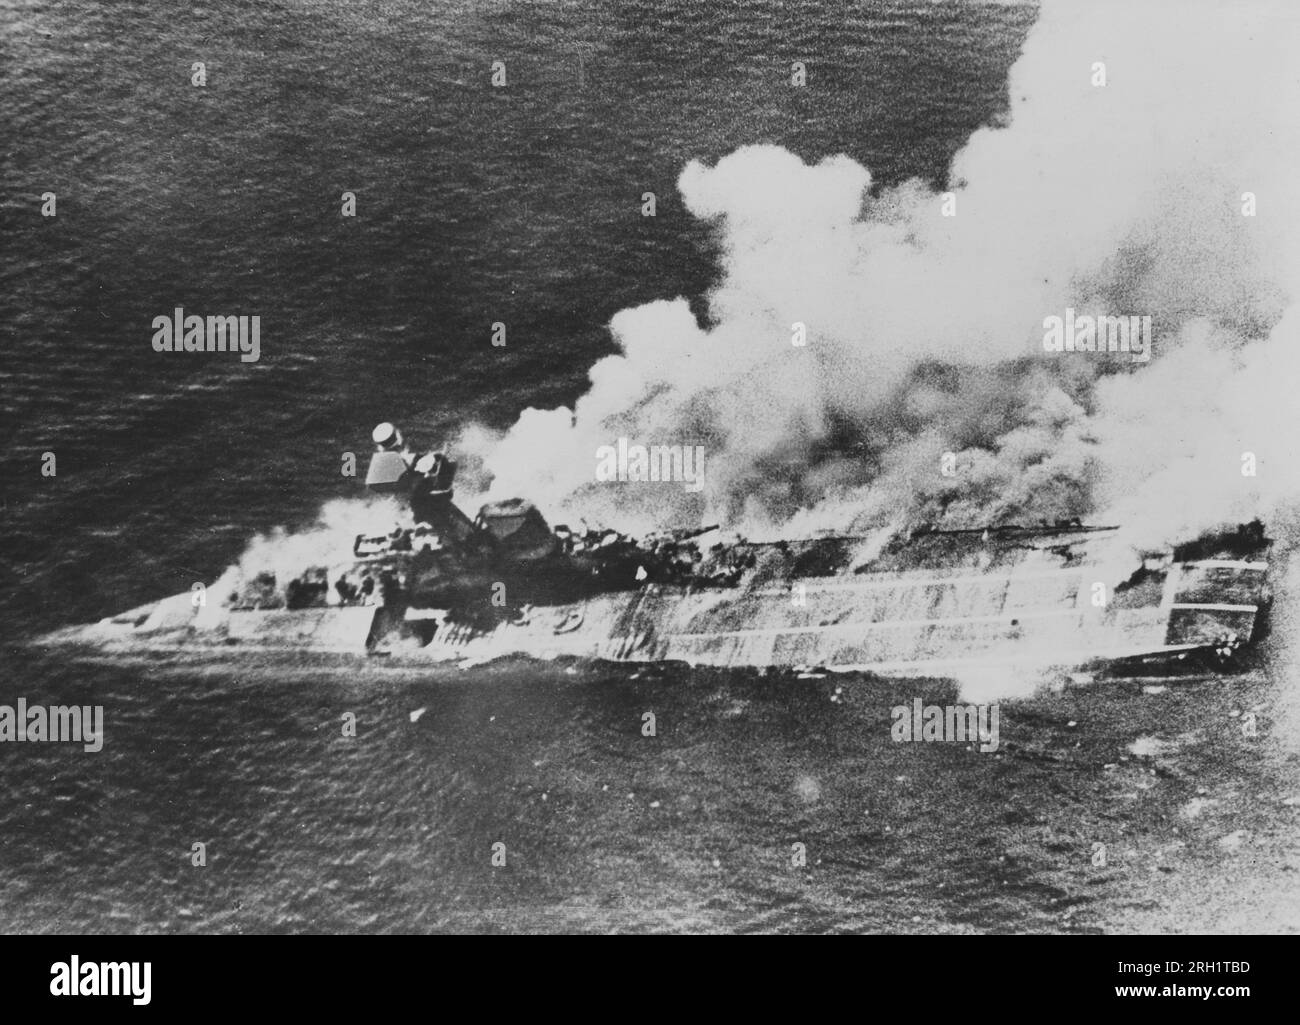 Indian Ocean Raid, March 31 – April 10 1942. Smokes billows from the sinking Royal Navy aircraft carrier HMS Hermes in the aftermath of an attack from Imperial Japanese Navy aircraft, April 9 1942. Stock Photo